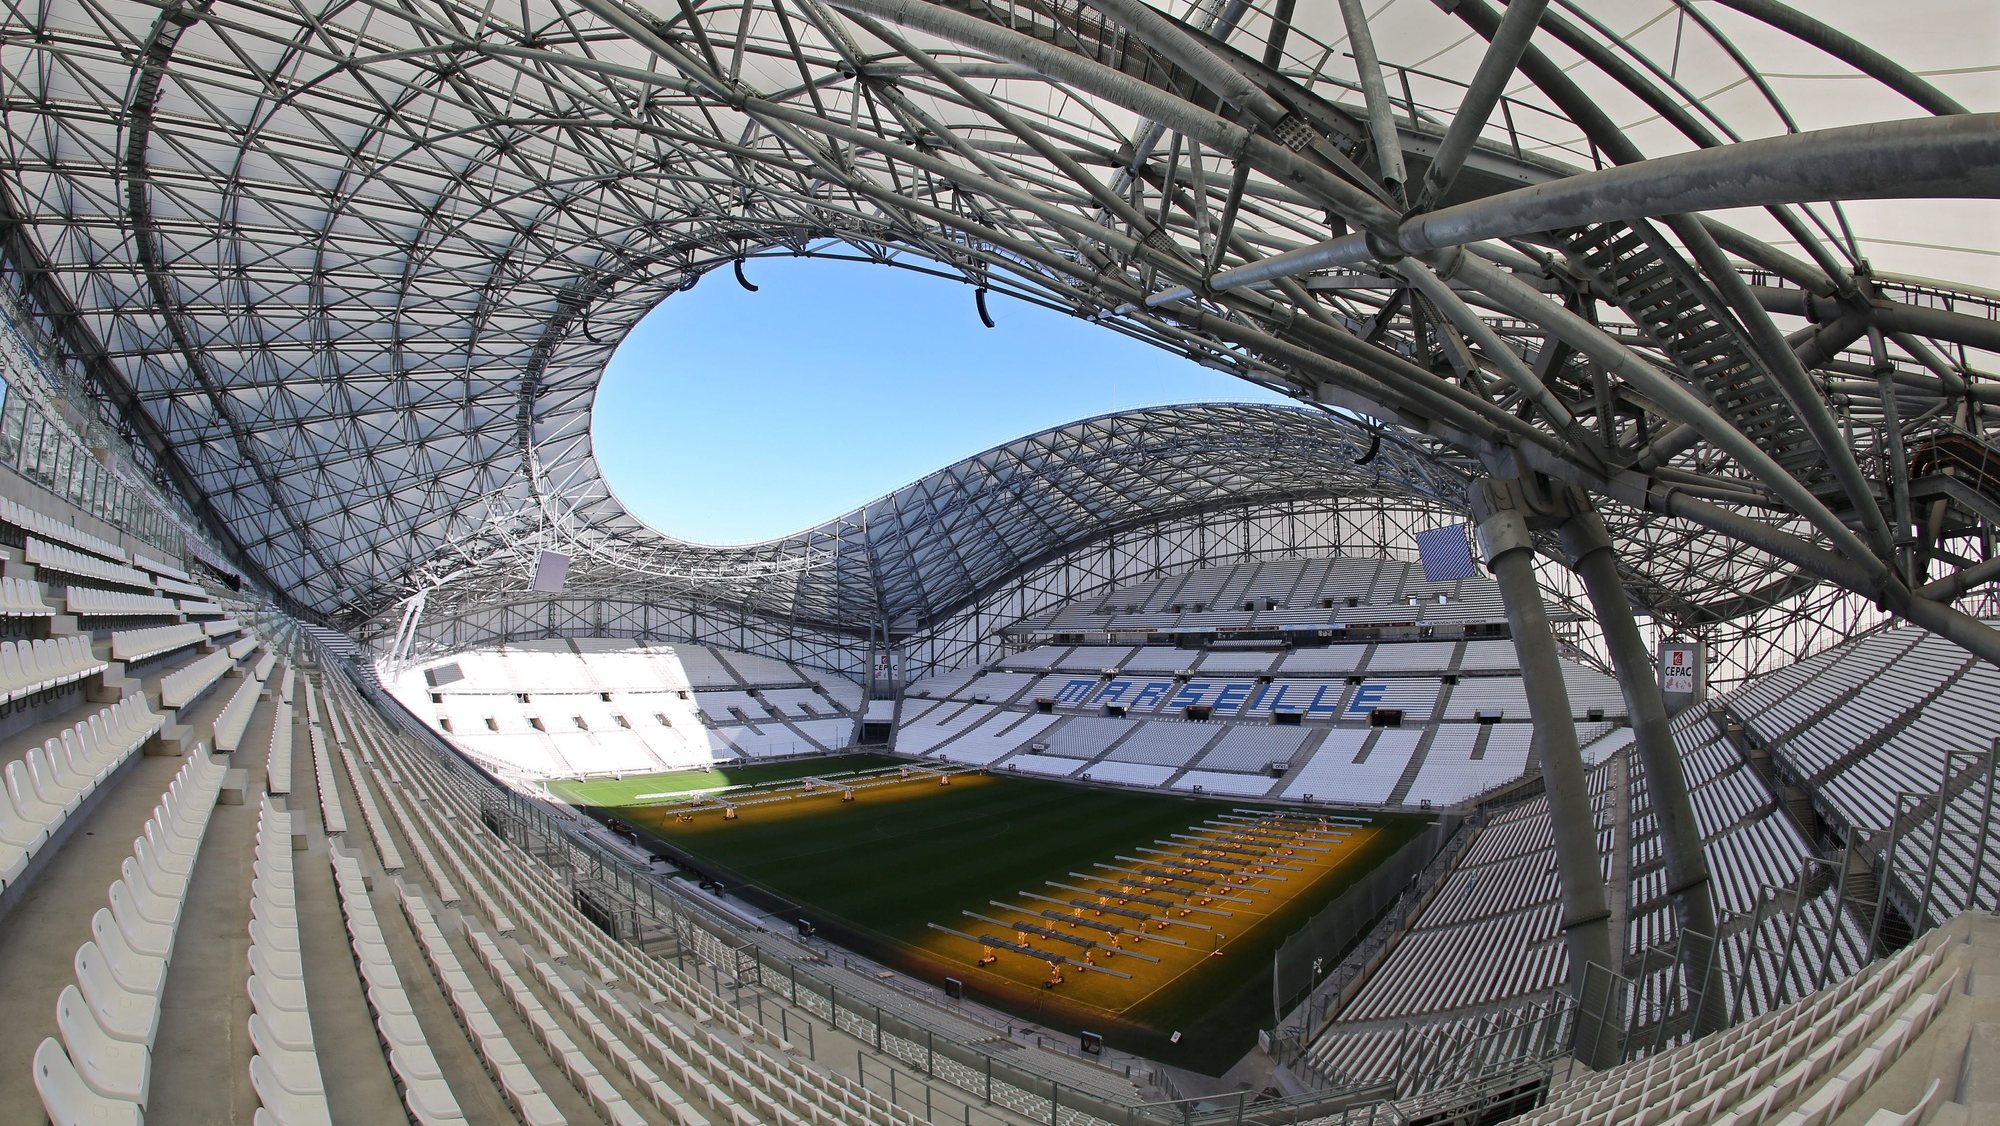 epa05270100 Picture taken on 04 February 2016 of an interior view of the Stade Velodrome in Marseille, southern France. With a capacity of 67,394 seats, the Stade Velodrome is the home ground of French Ligue 1 soccer club Olympique Marseille and will be one of the venues of the UEFA EURO 2016 soccer championship.  EPA/GERNOT HENSEL *** Local Caption *** 52581803